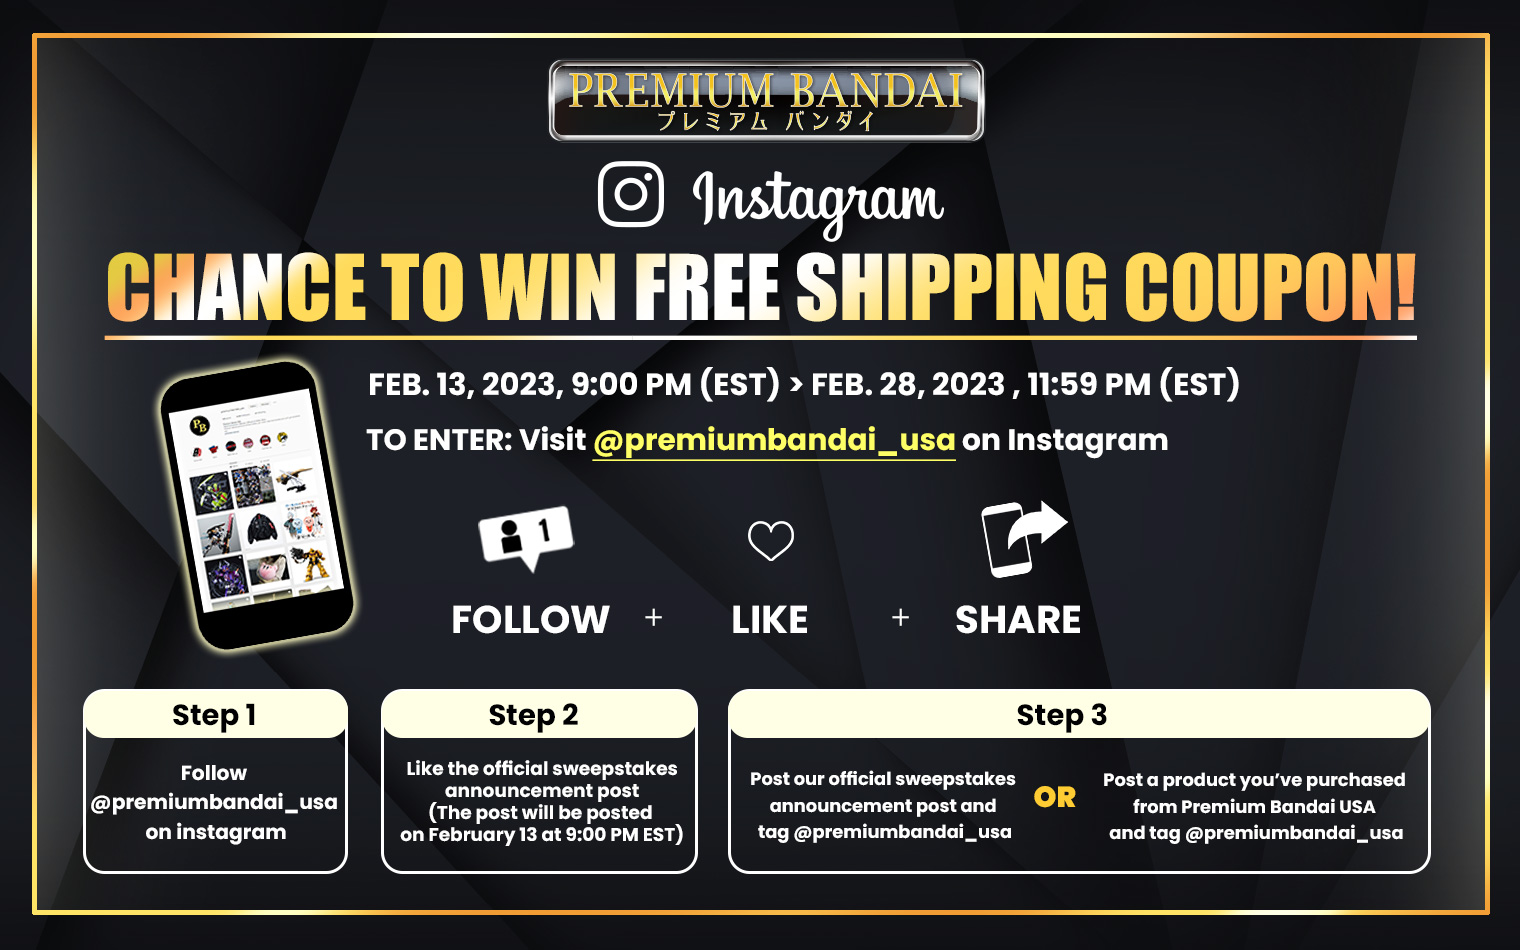 CHANCE TO WIN FREE SHIPPING COUPON!